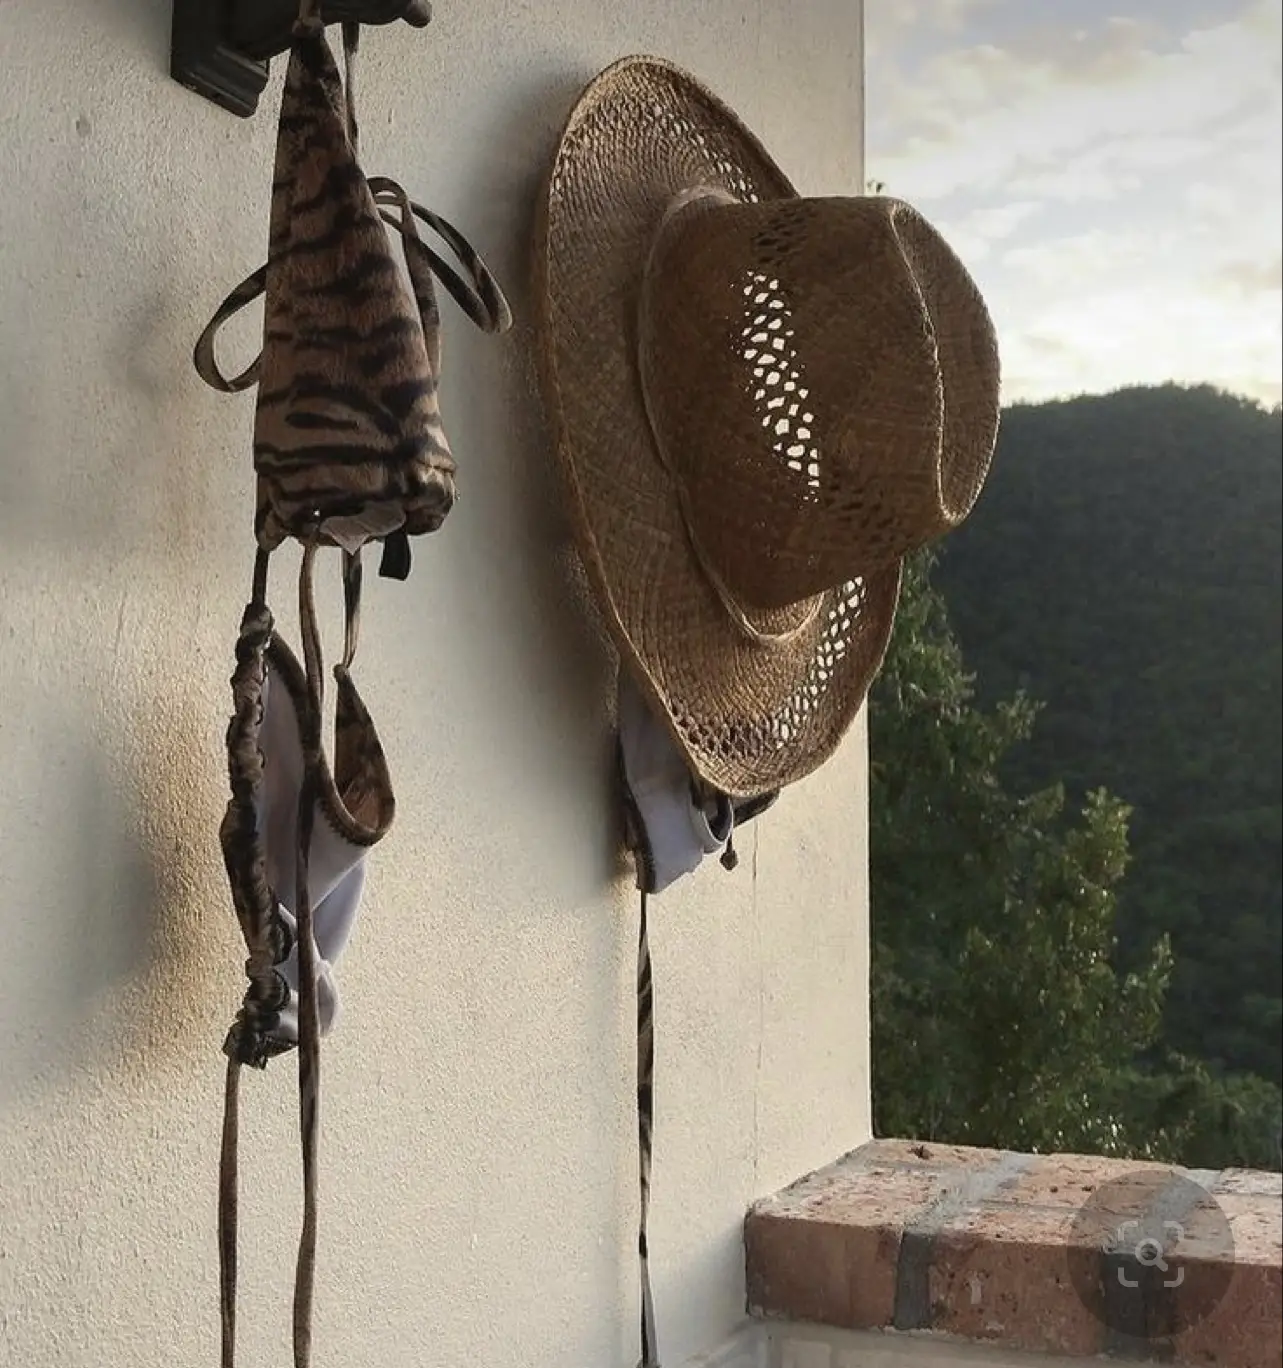  A white hat with a leopard print on it is hanging on a hook.